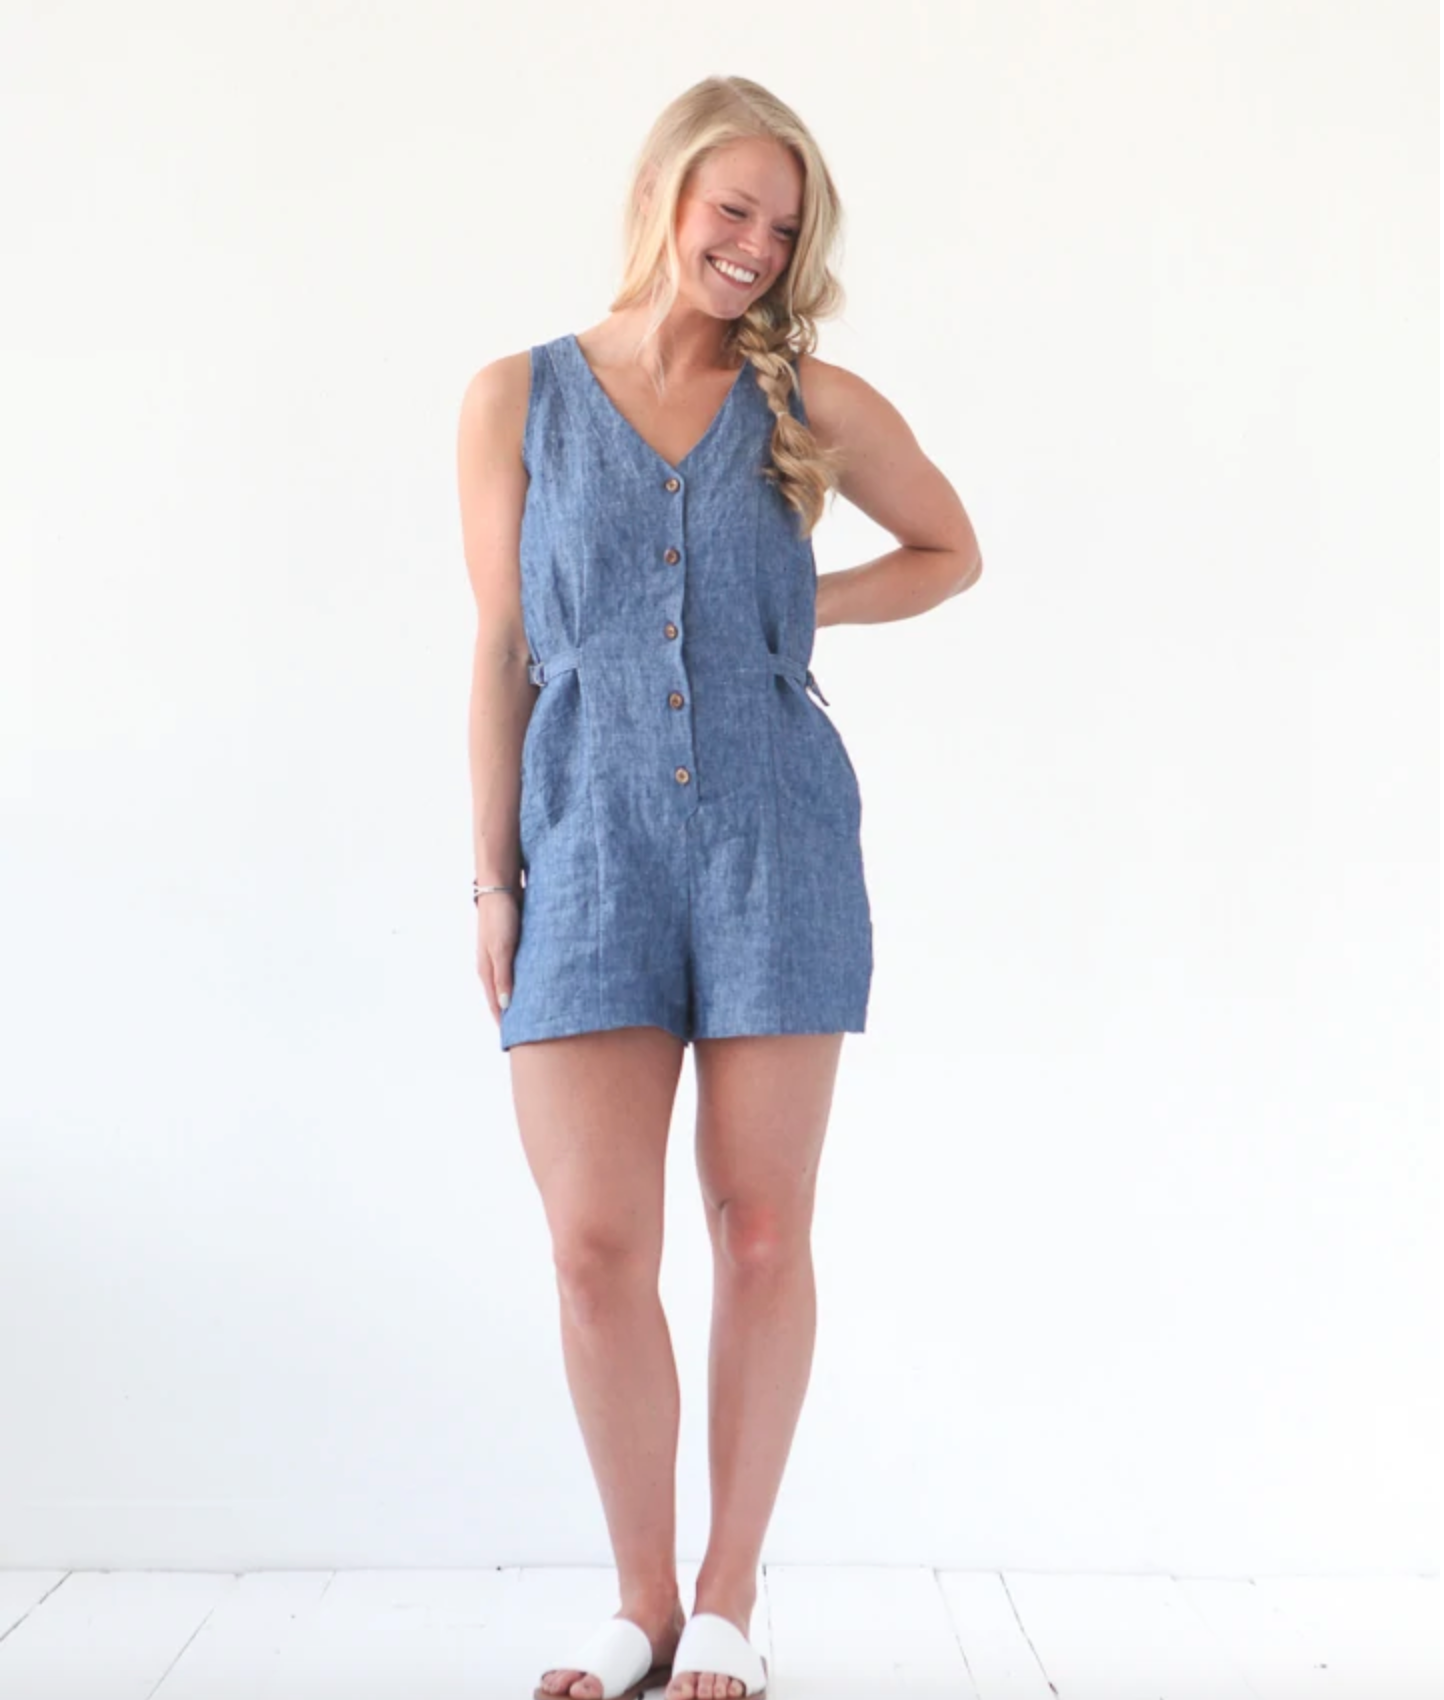 INTRODUCING THE RORY JUMPSUIT!